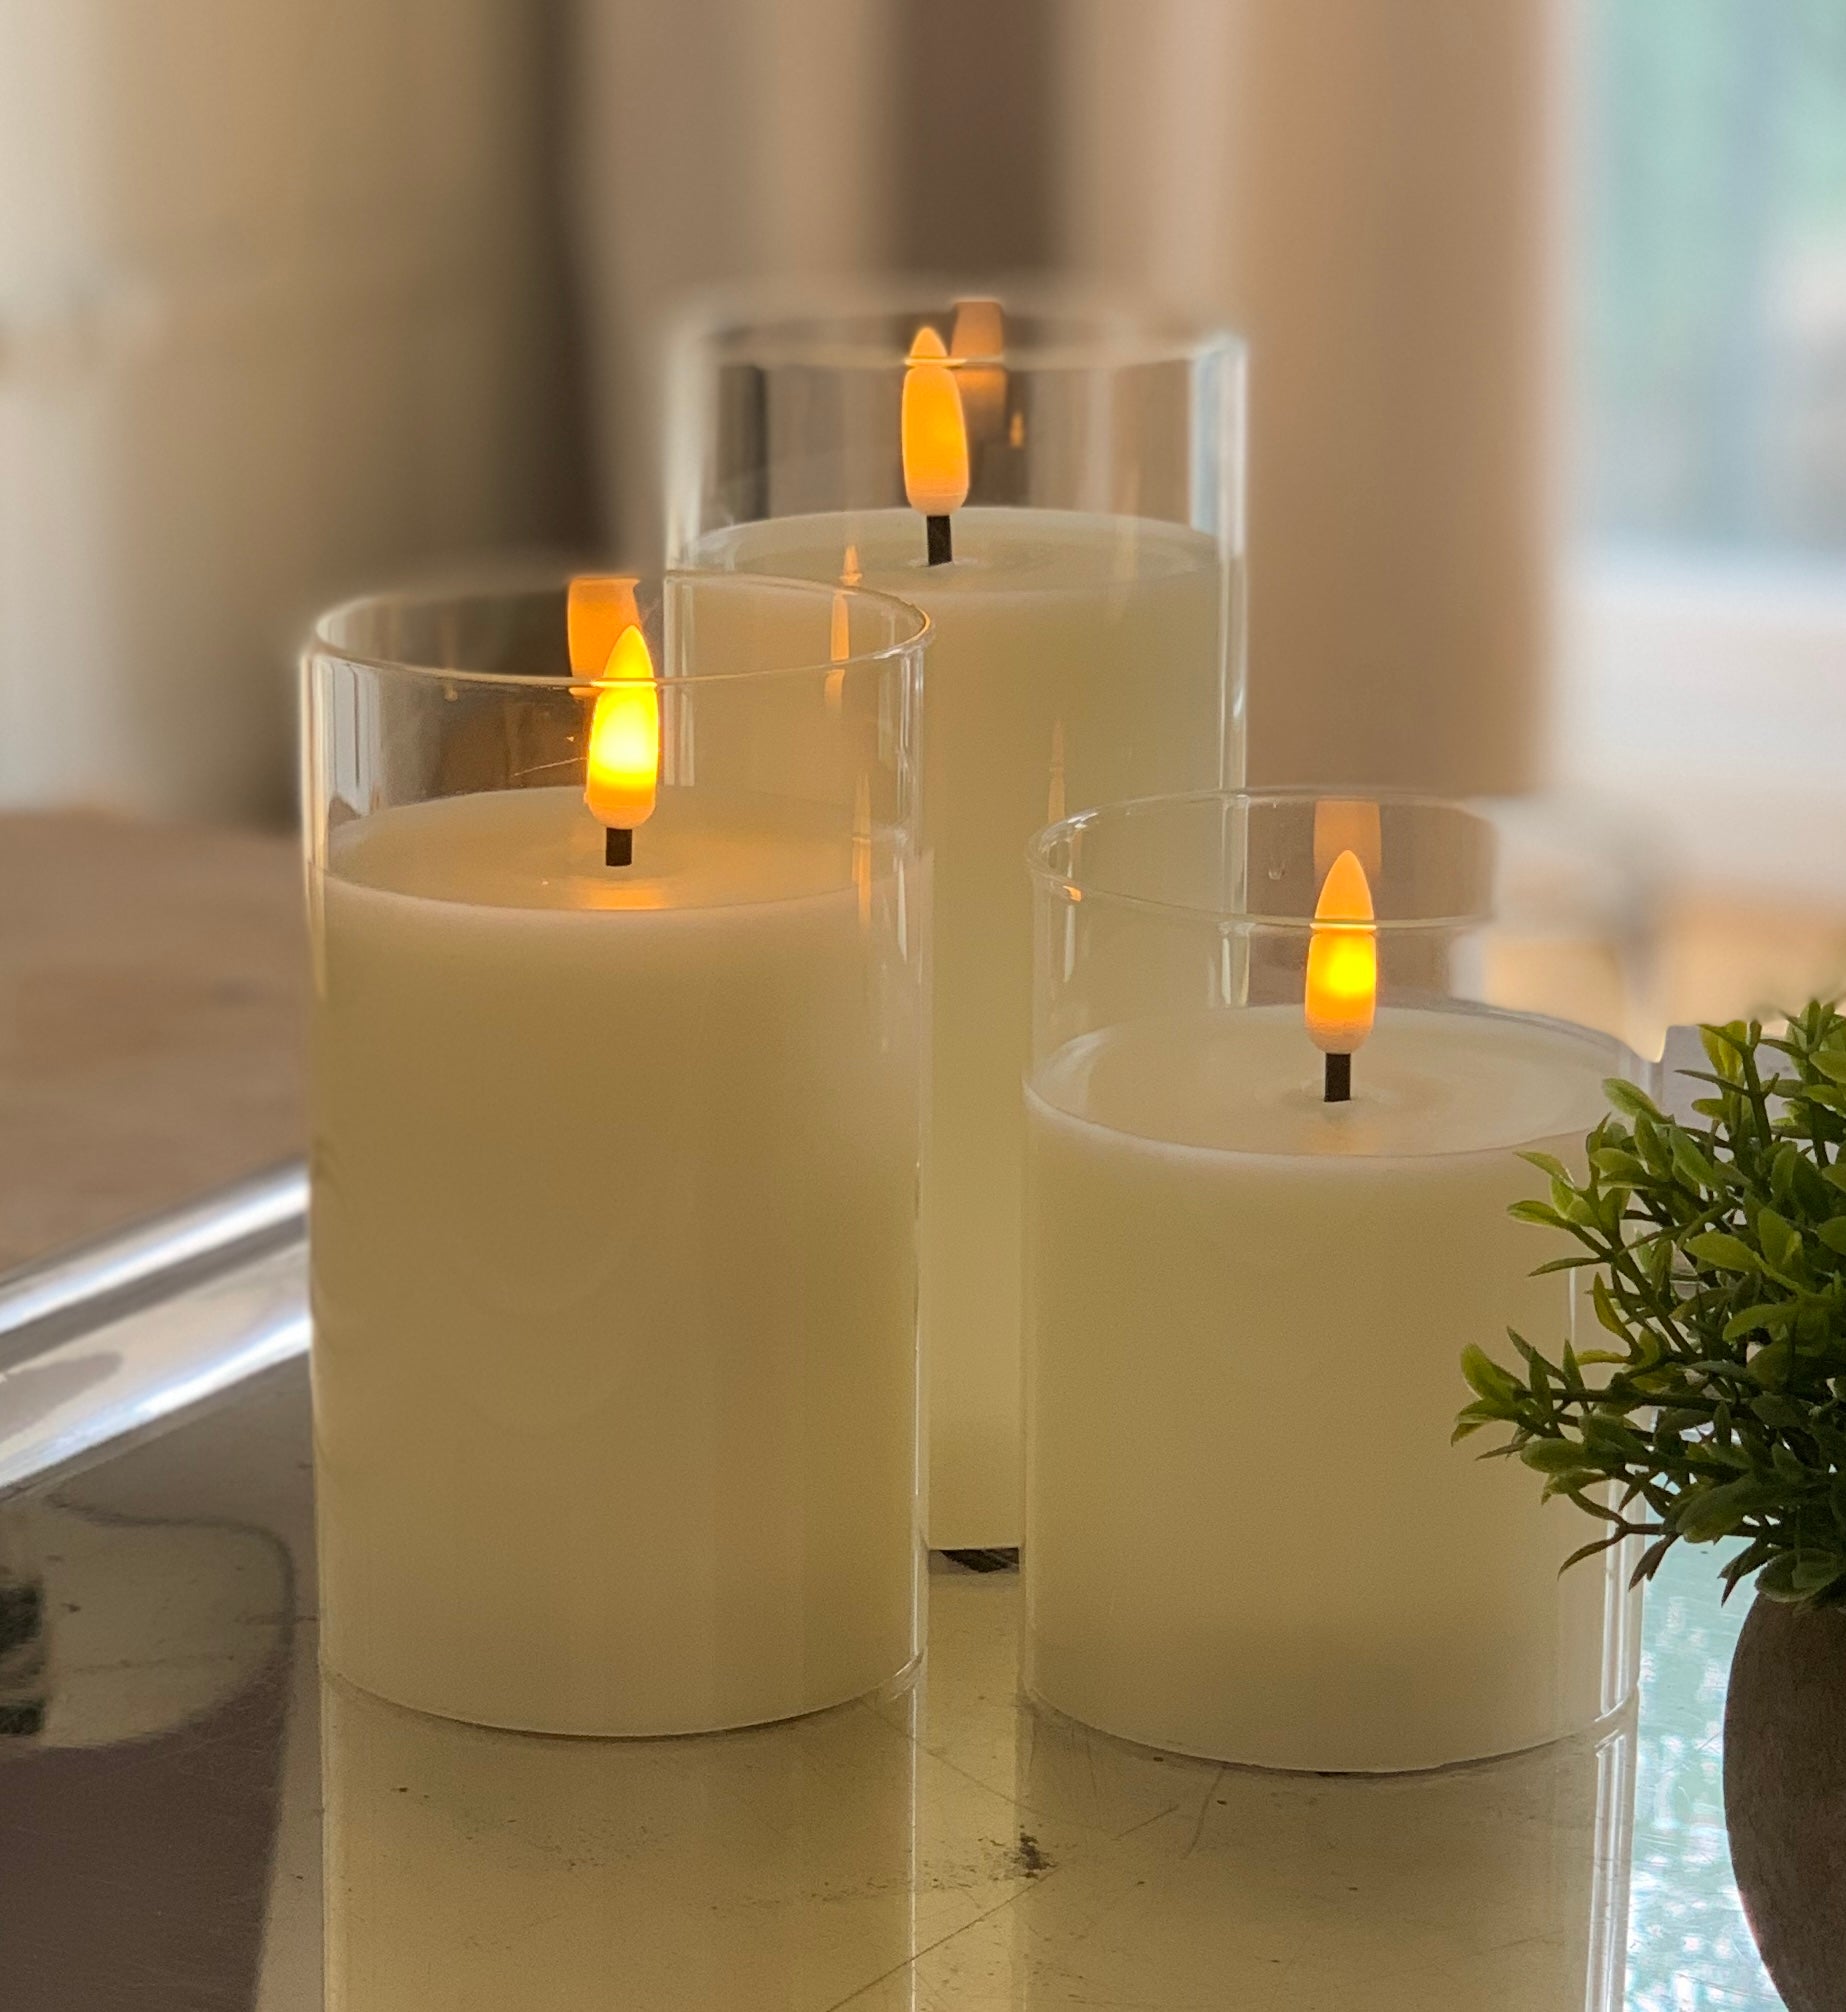 Trio LED flame candles in glass jar